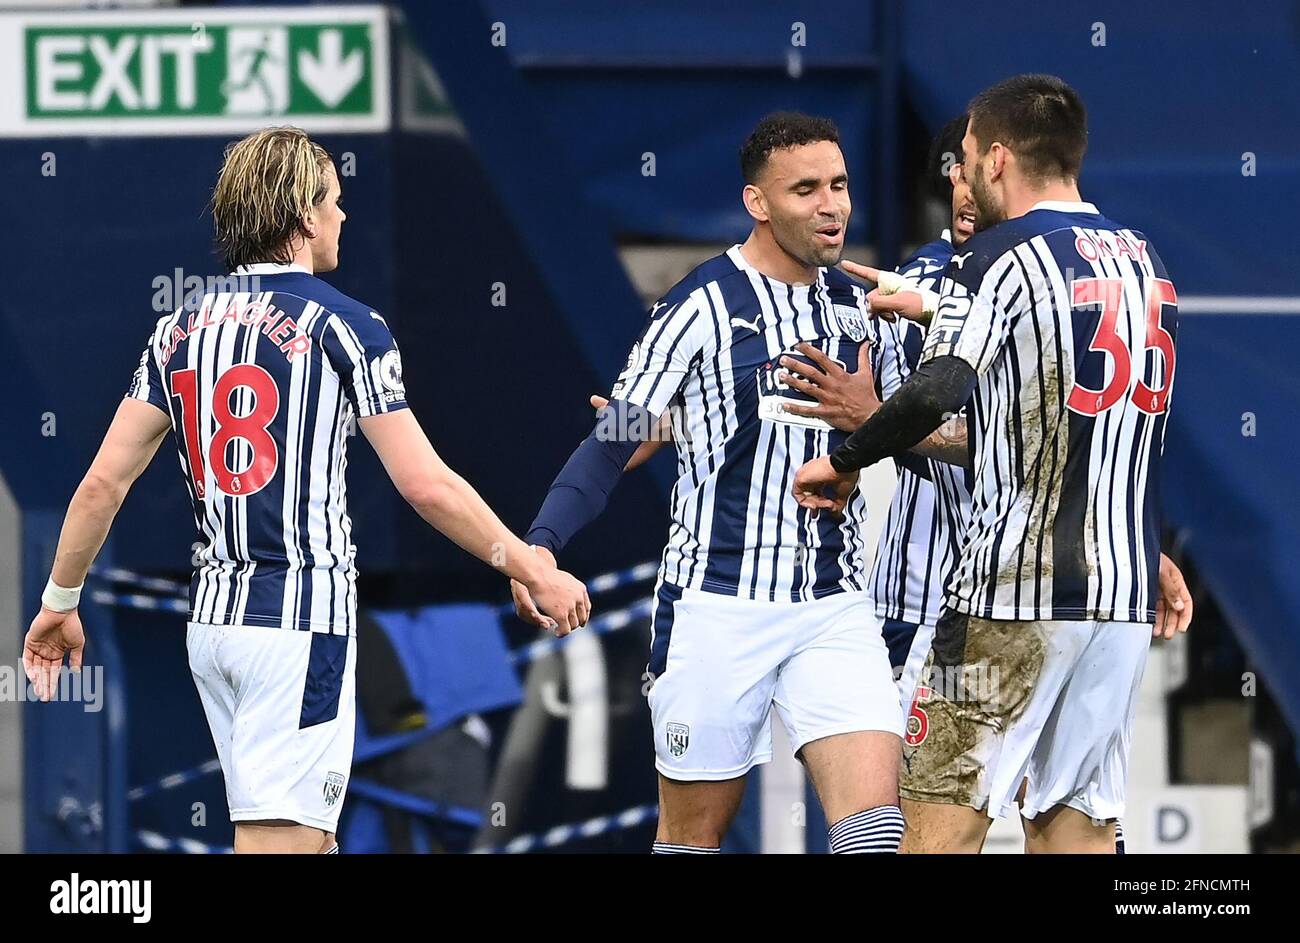 West Bromwich Albion's Hal Robson-Kanu (centre) celebrates scoring their side's first goal of the game with team-mates during the Premier League match at The Hawthorns, West Bromwich. Picture date: Sunday May 16, 2021. Stock Photo